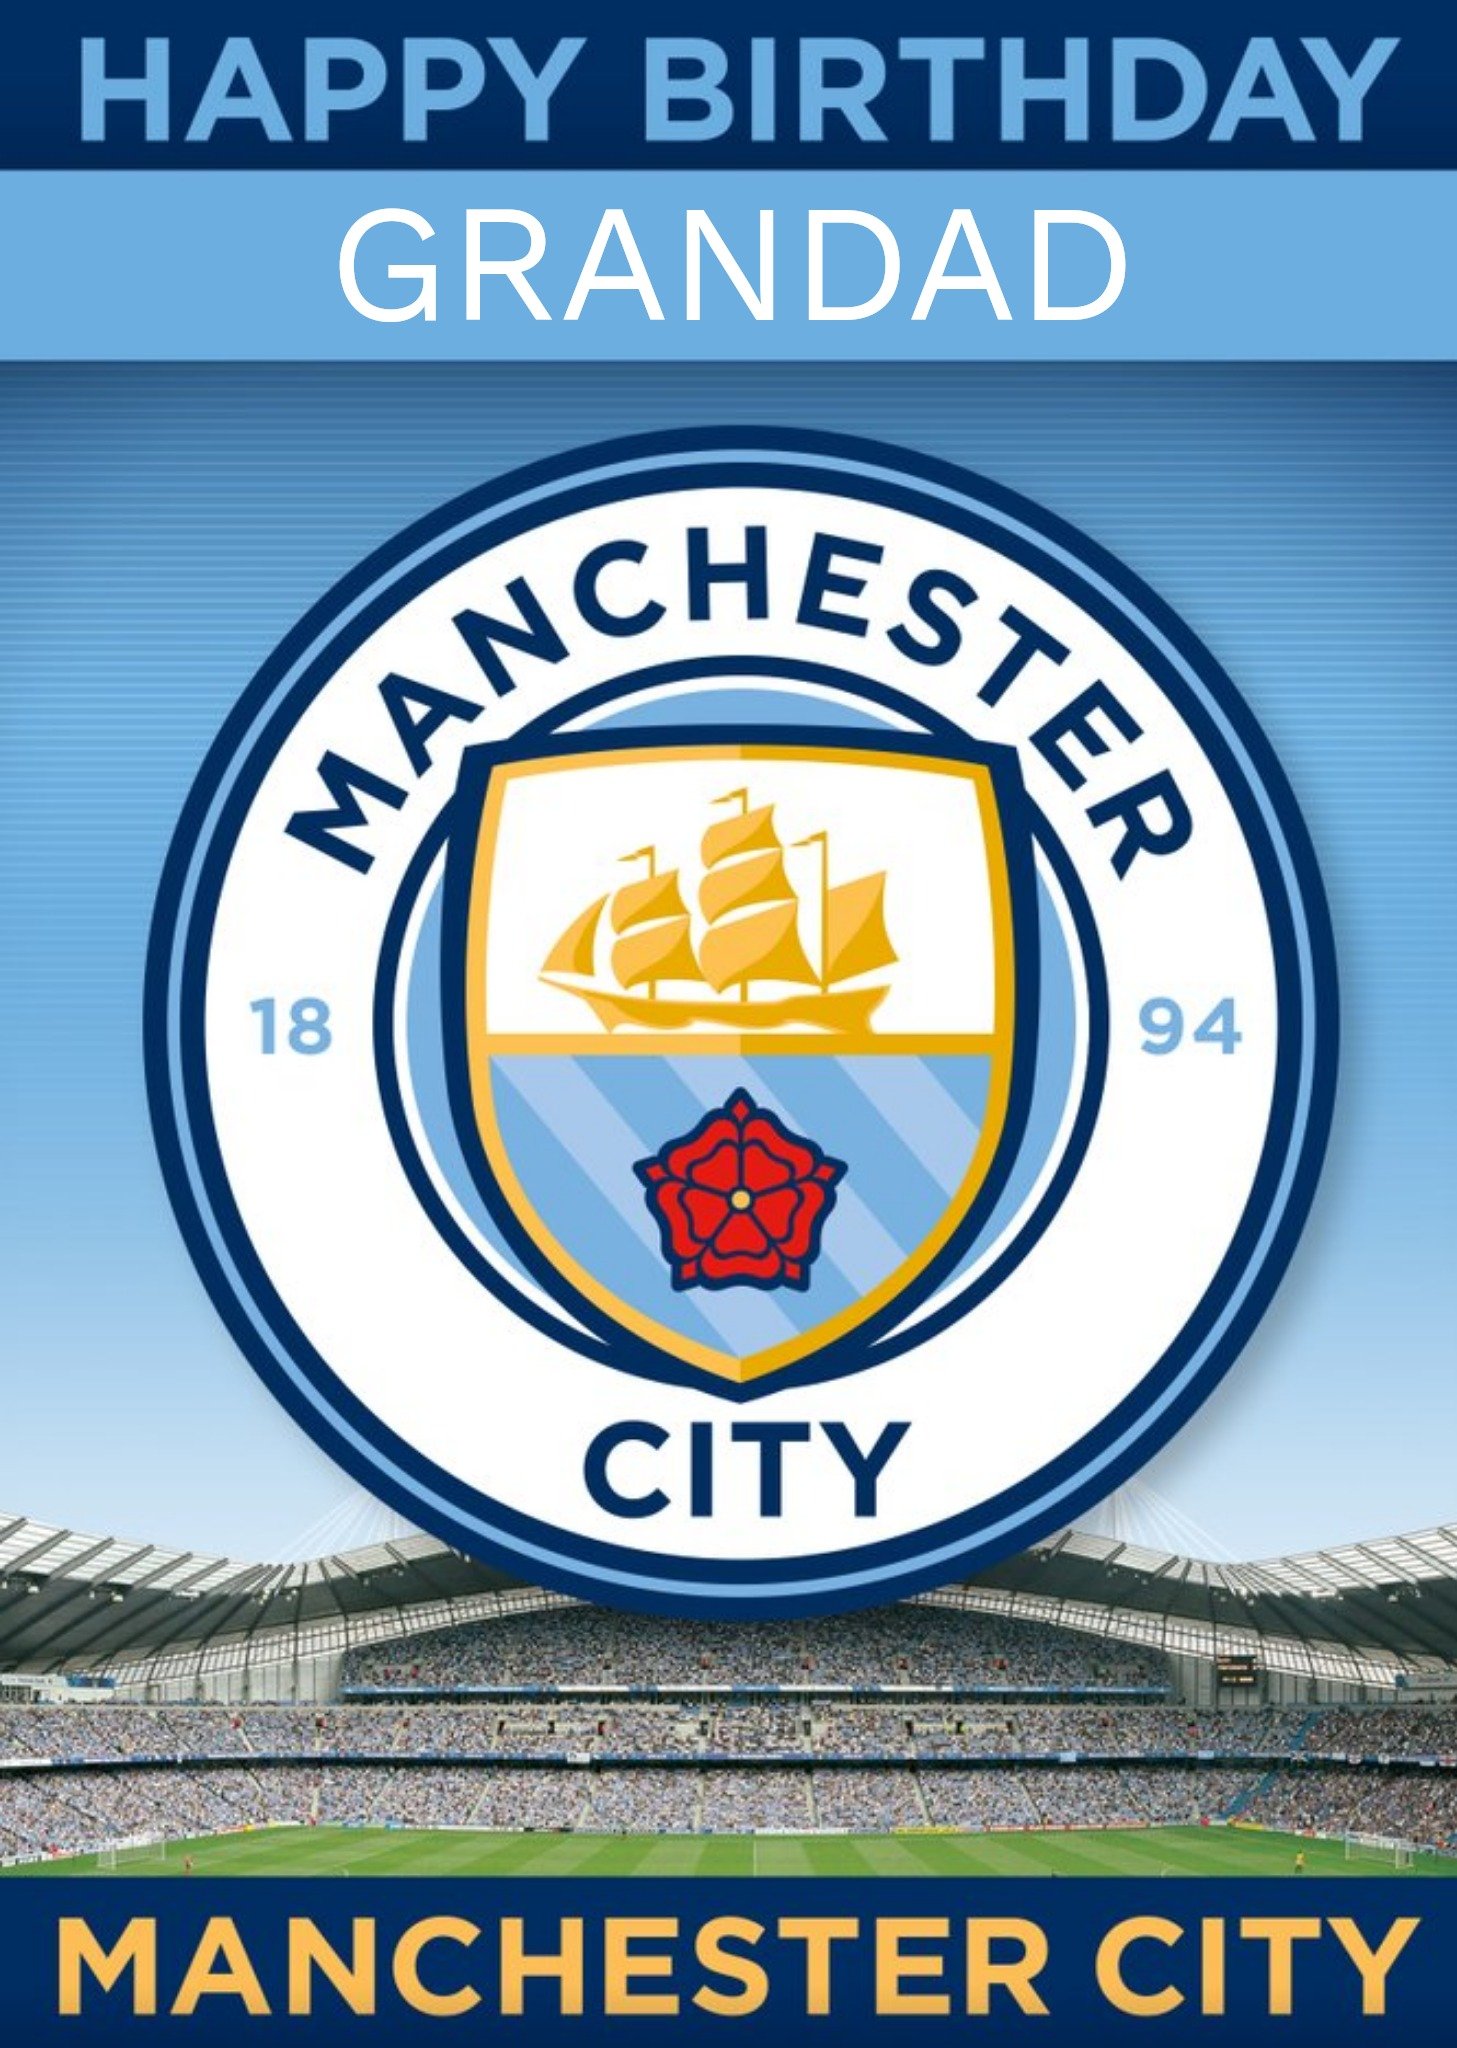 Other Manchester City Football Birthday Card - Grandad, Large